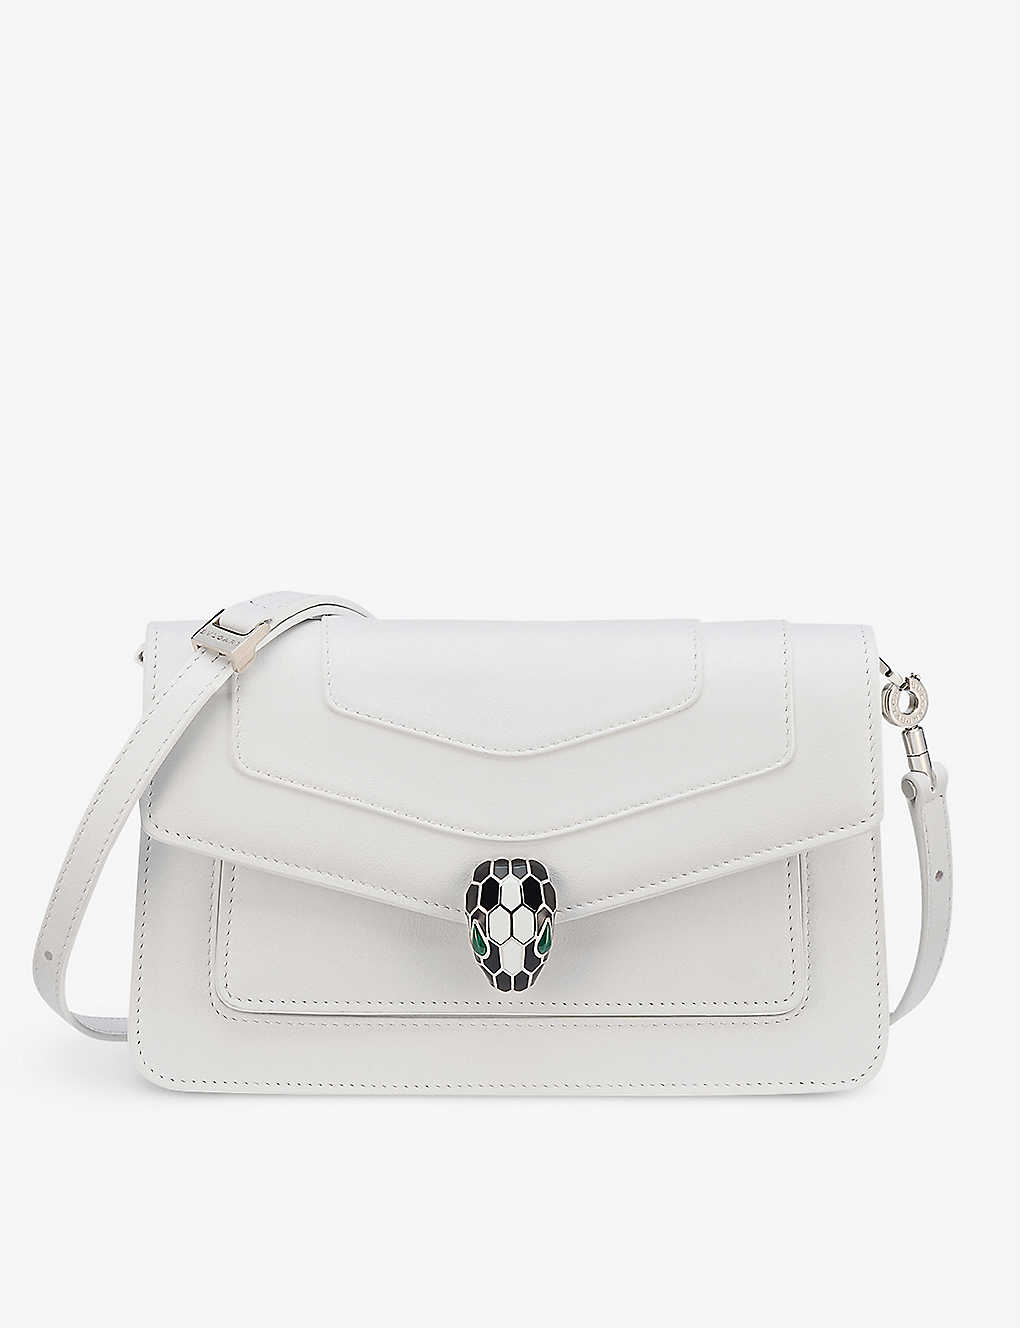 Bvlgari Womens White Serpenti Forever East-west Leather Shoulder Bag